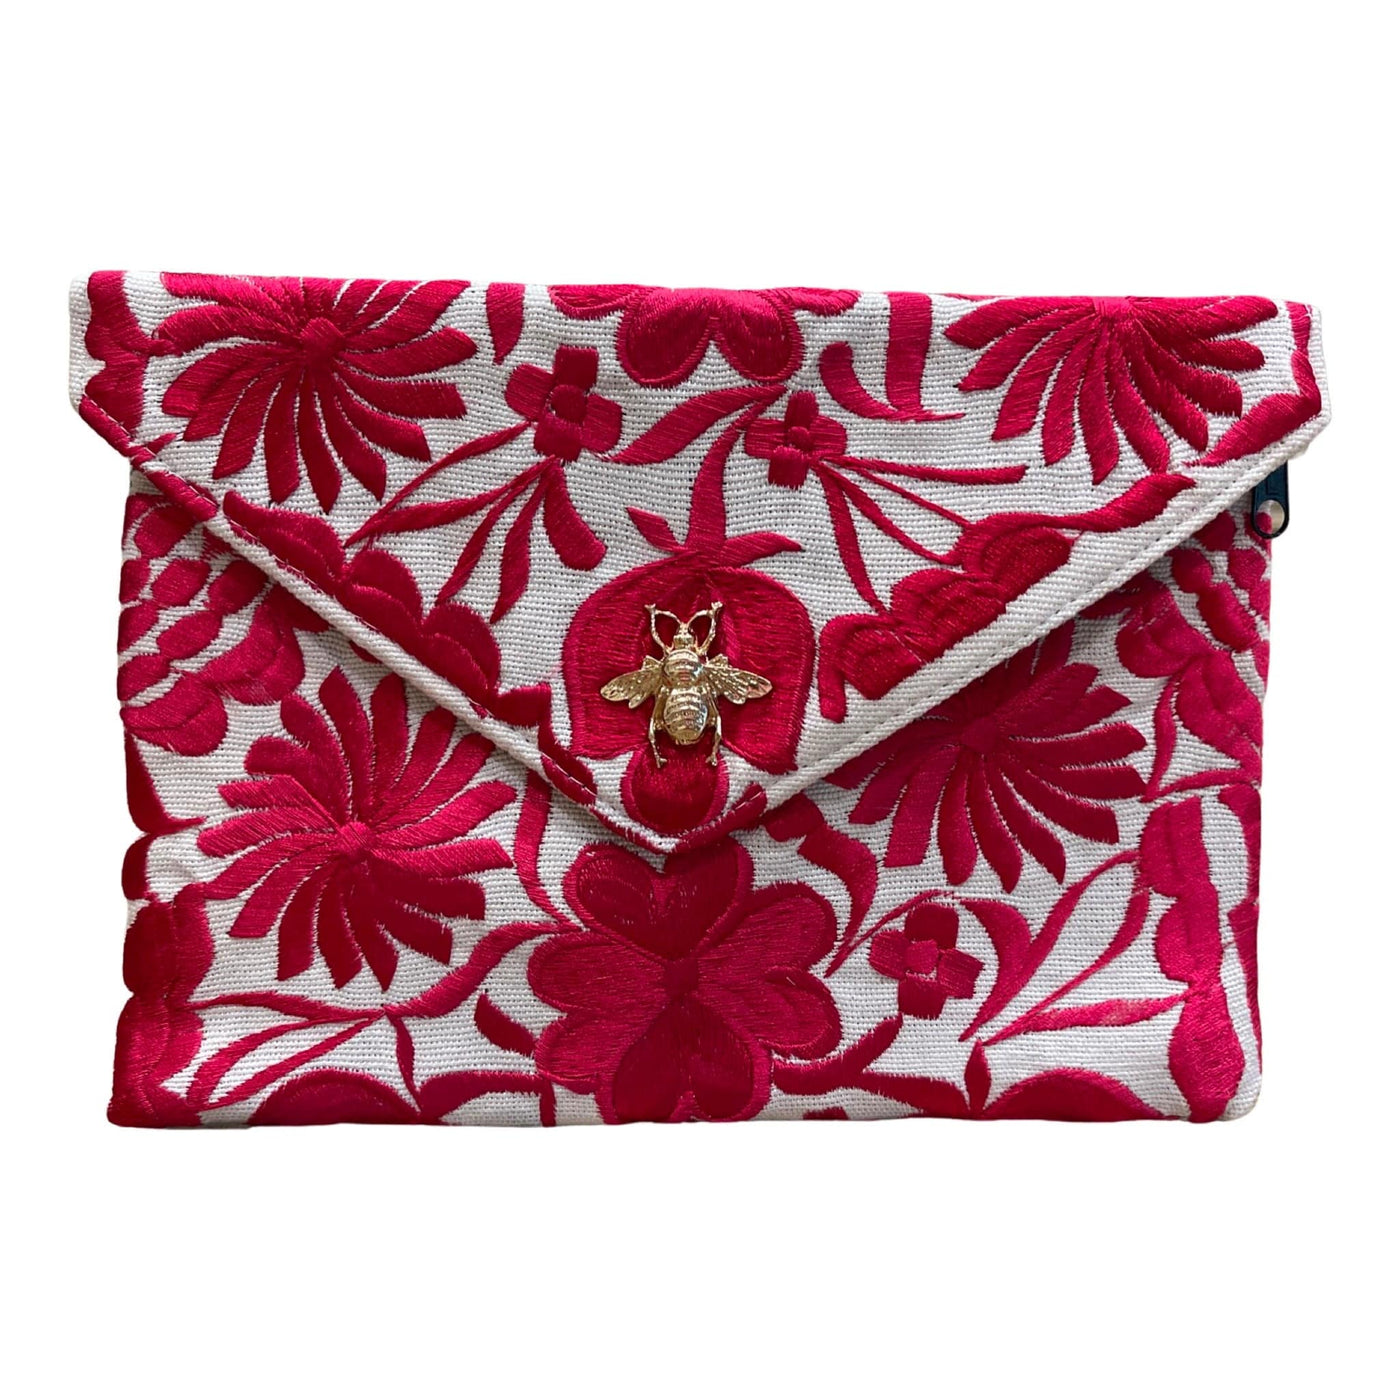 BeeLoved Custom Artisan Bags and Gifts Handbags Roses are Red Envelope Clutch Bag